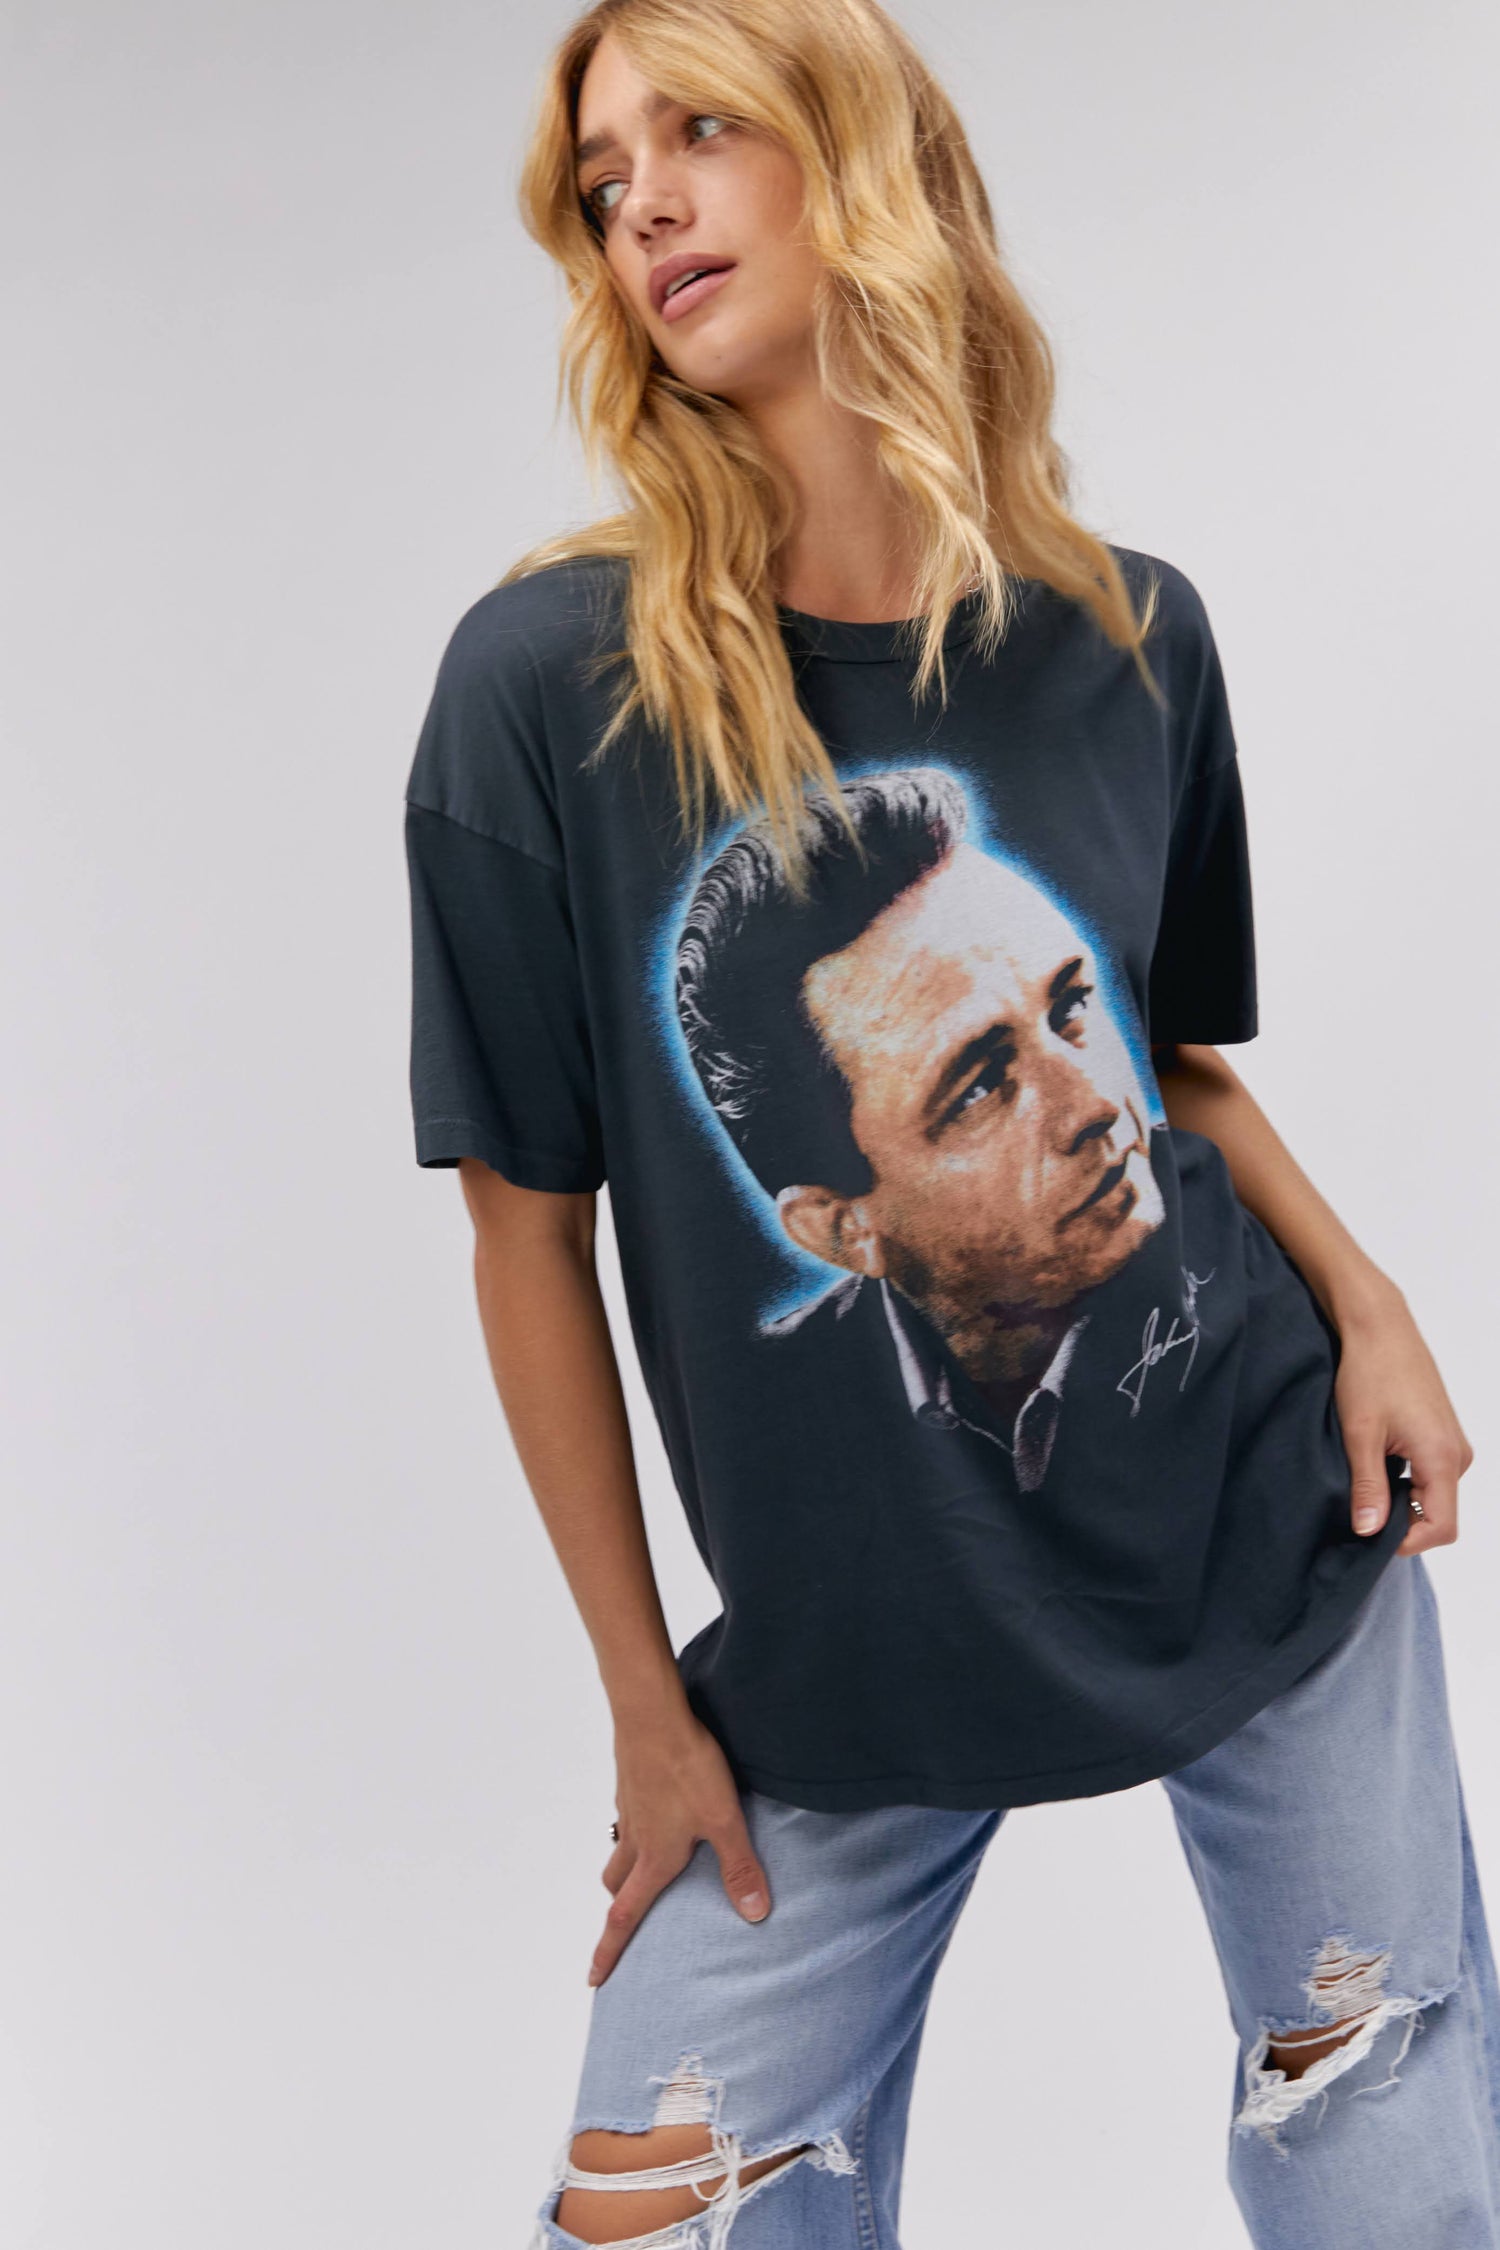 A blonde-haired model featuring a black tee designed with a portrait of Johnny Cash and stamped with 'Cash' at the back.